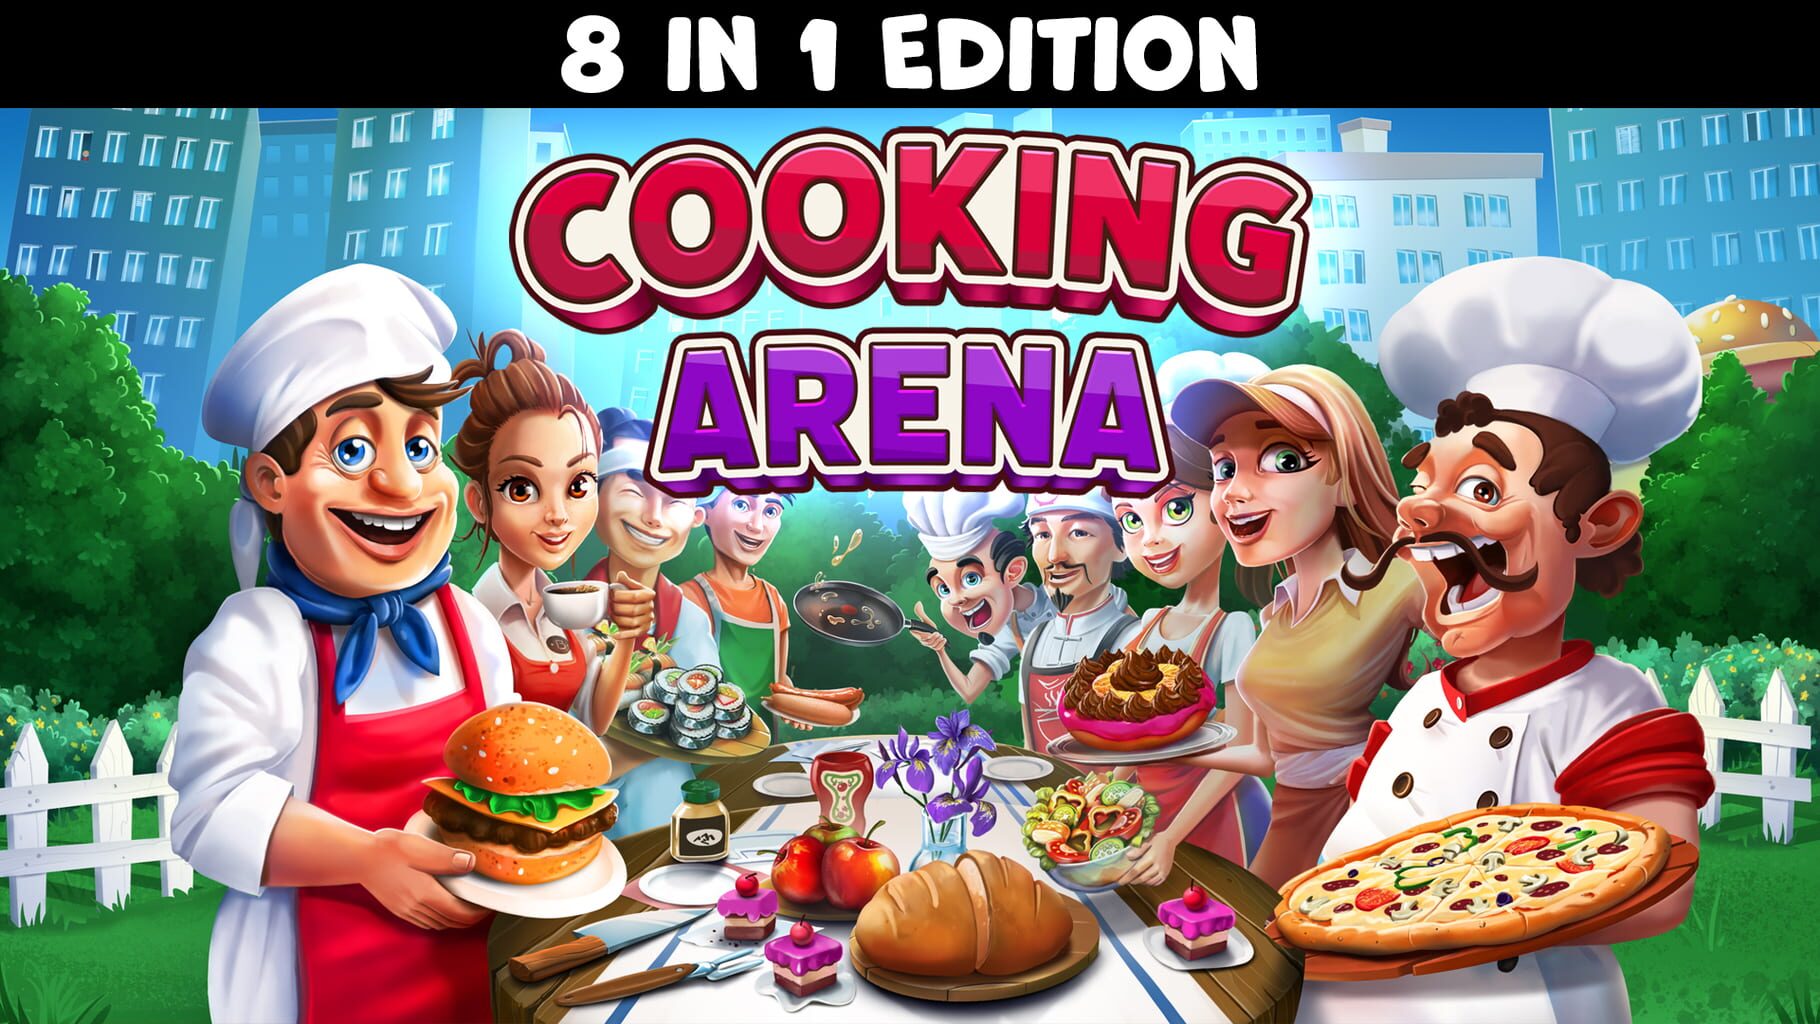 Cooking Arena: 8 in 1 Edition artwork